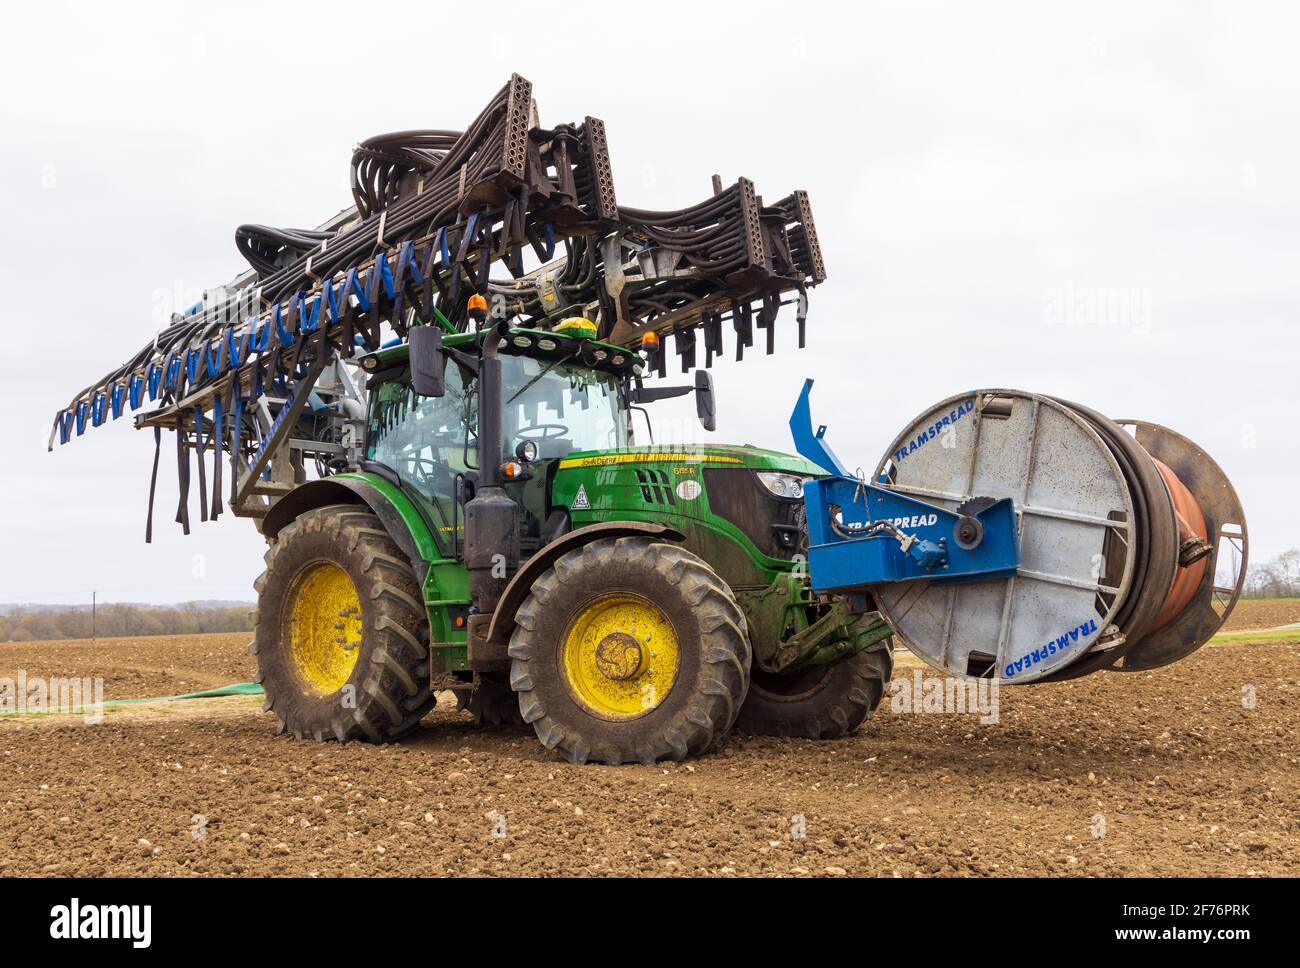 https://c8.alamy.com/comp/2F76PRK/tractor-with-a-folded-tramspread-slurry-spreader-dribble-bar-and-mounted-hose-reeler-used-to-apply-slurry-to-fields-hertfordshire-uk-2F76PRK.jpg